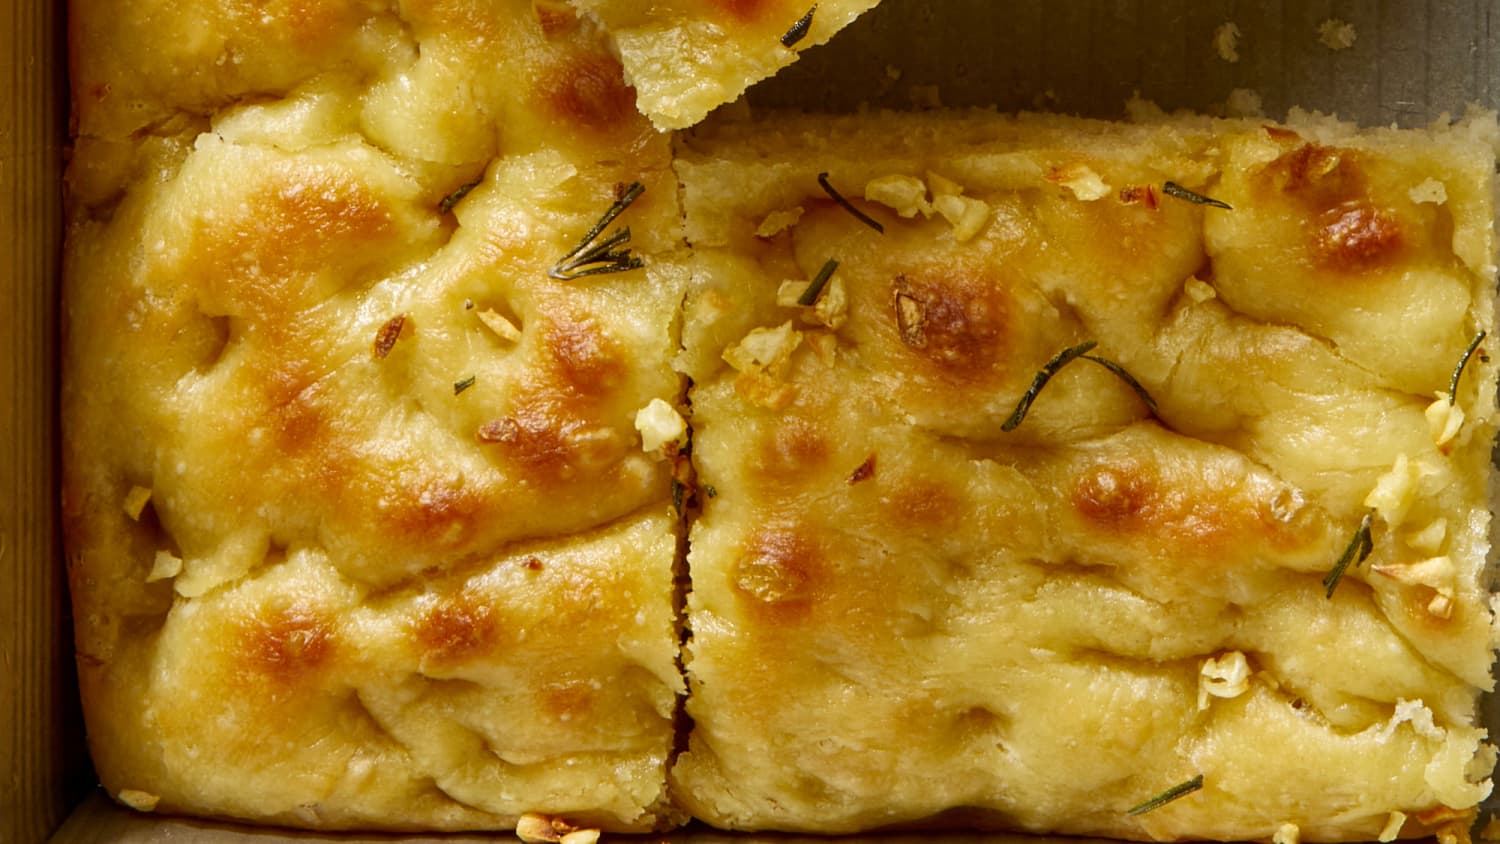 Rosemary Focaccia Bread Recipe – If You Give a Blonde a Kitchen